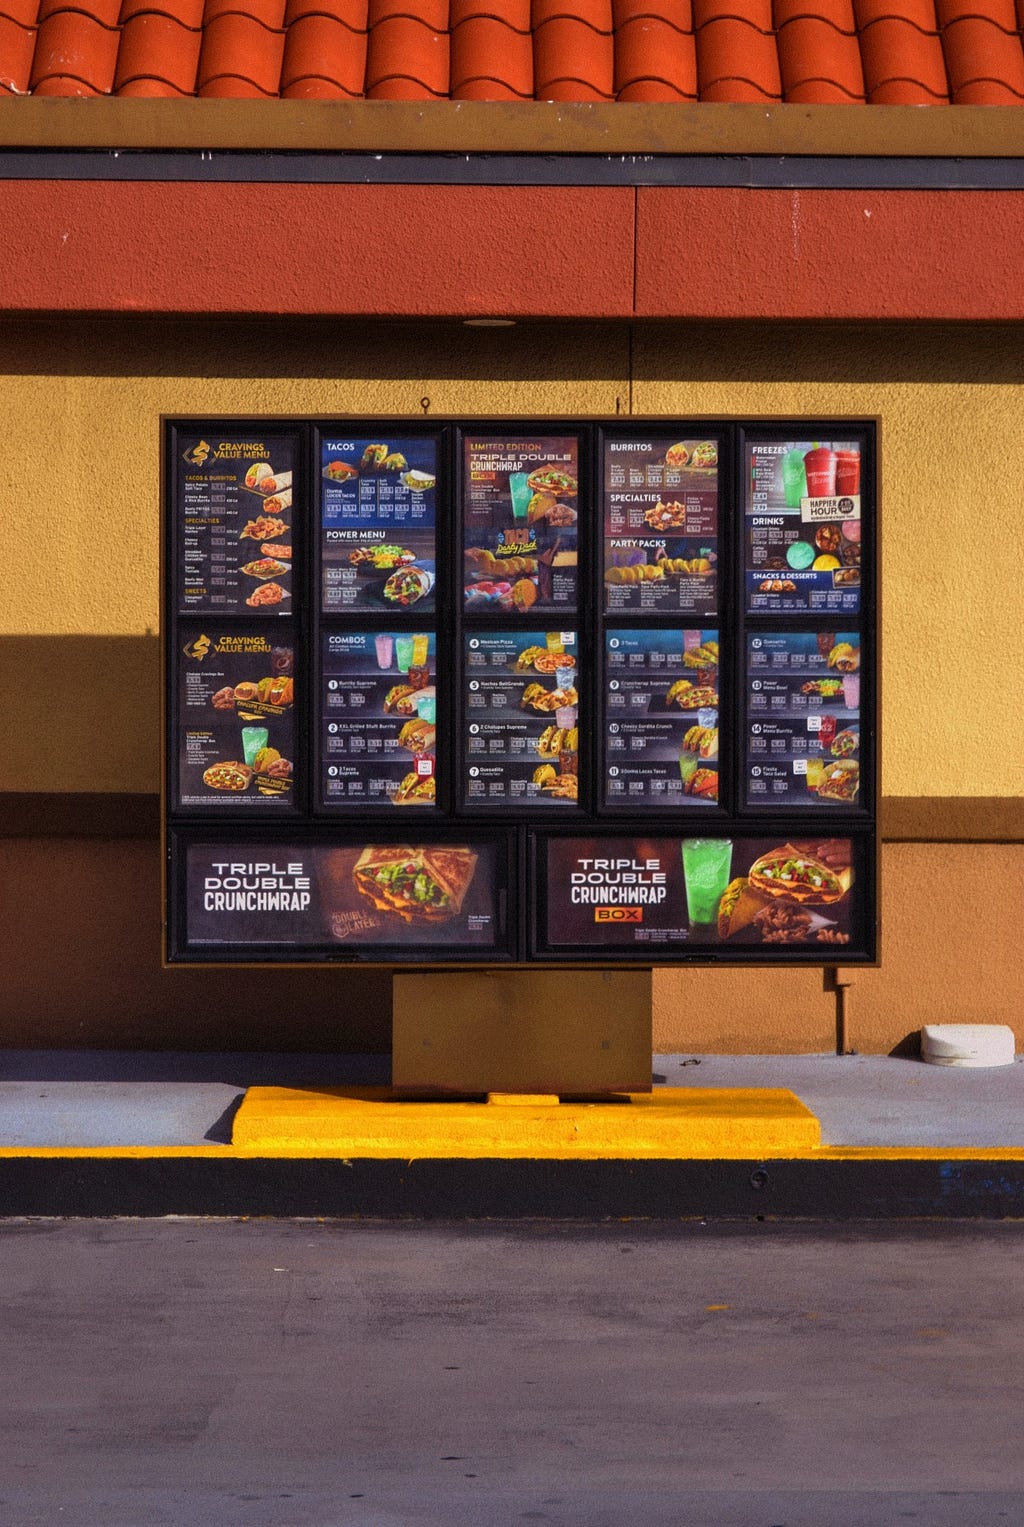 A Taco Bell drive thru menu is framed in the center of an orange building.